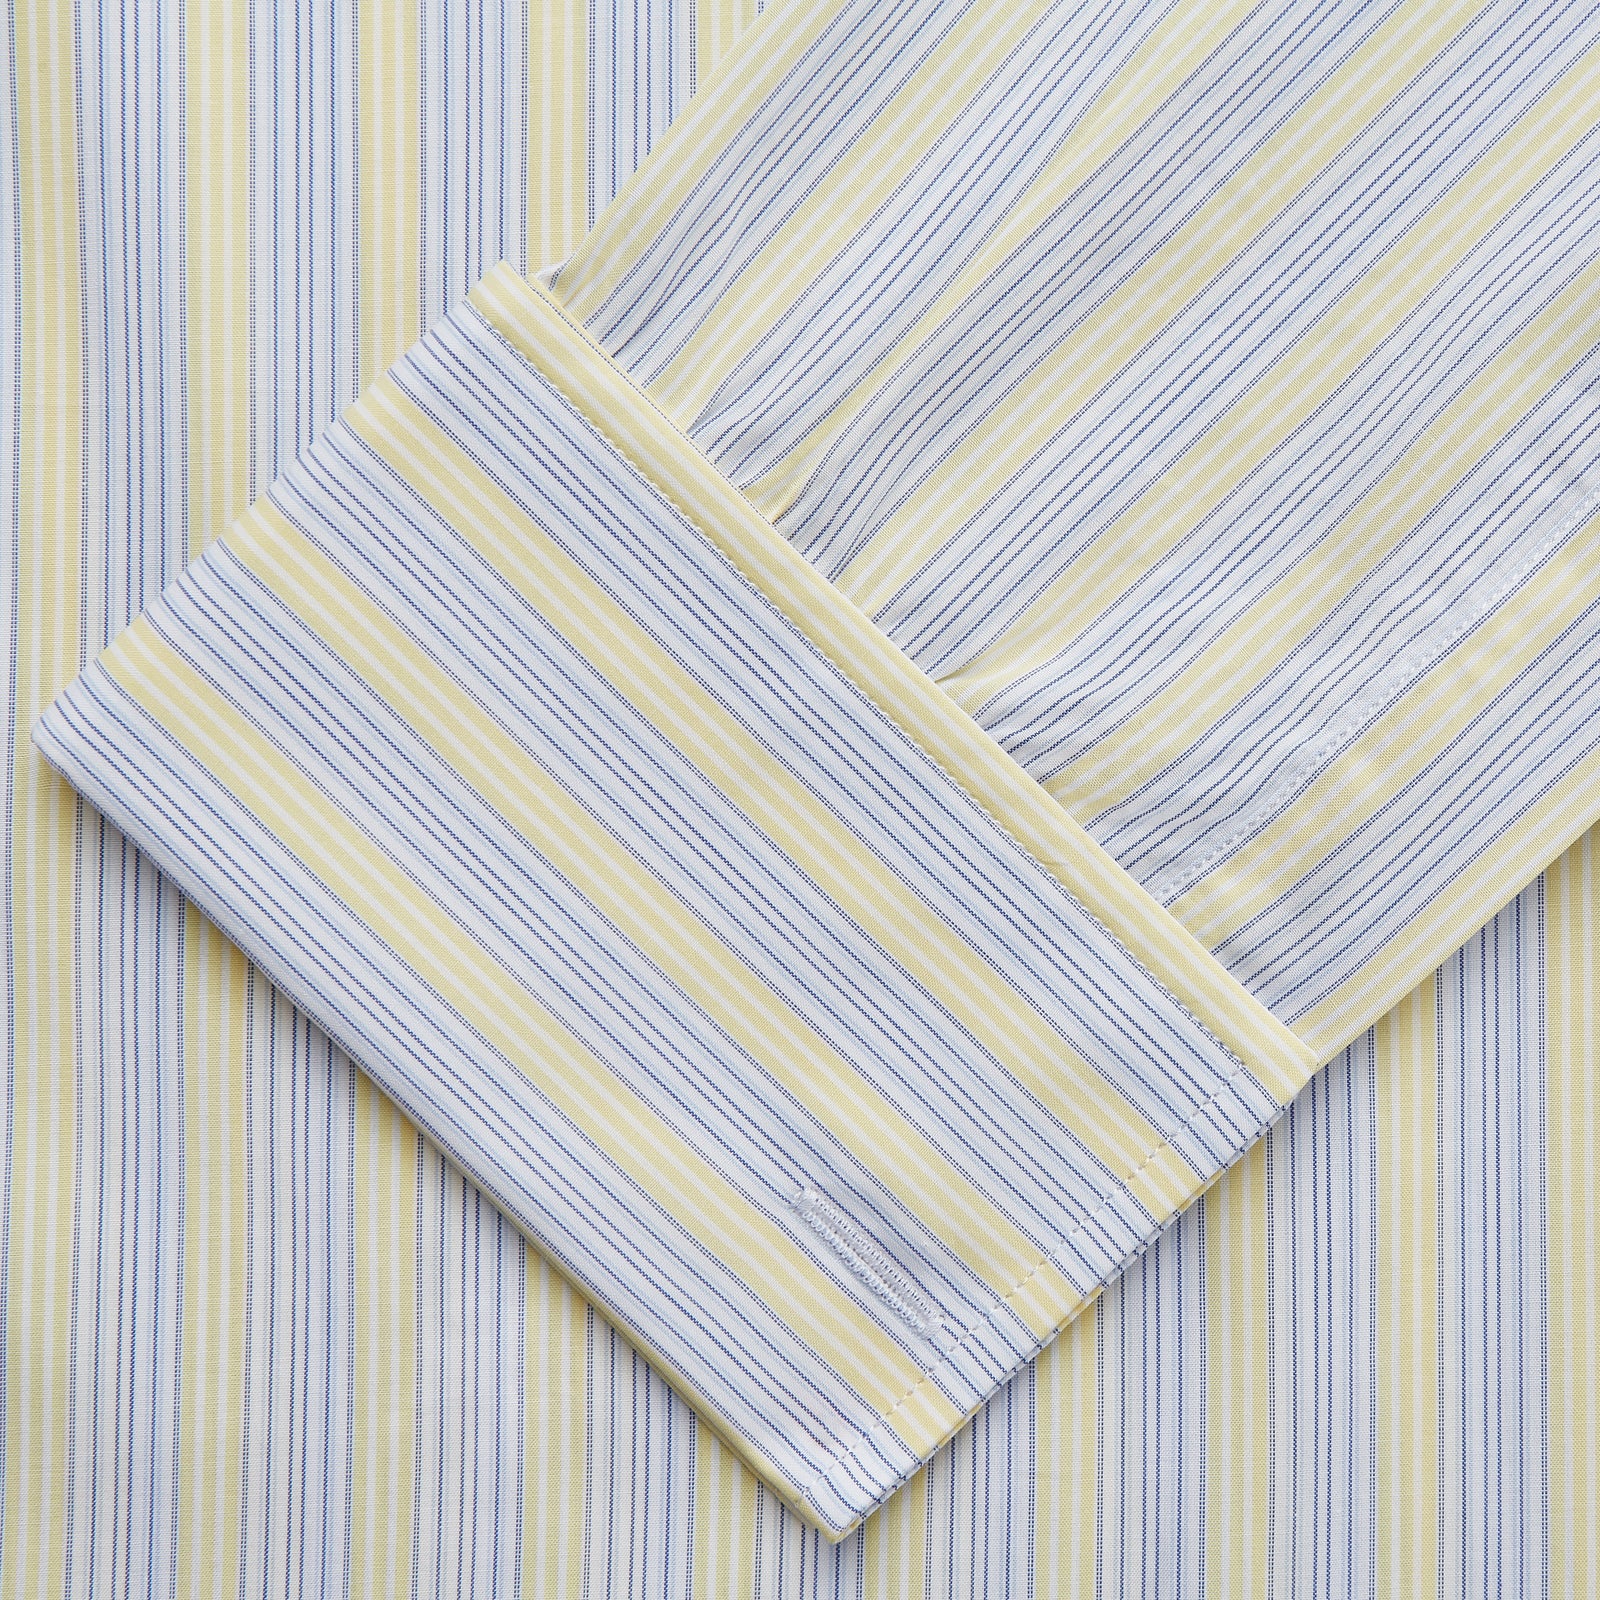 Yellow and Pale Blue Multi Stripe Cotton Regular Fit Whitby Shirt